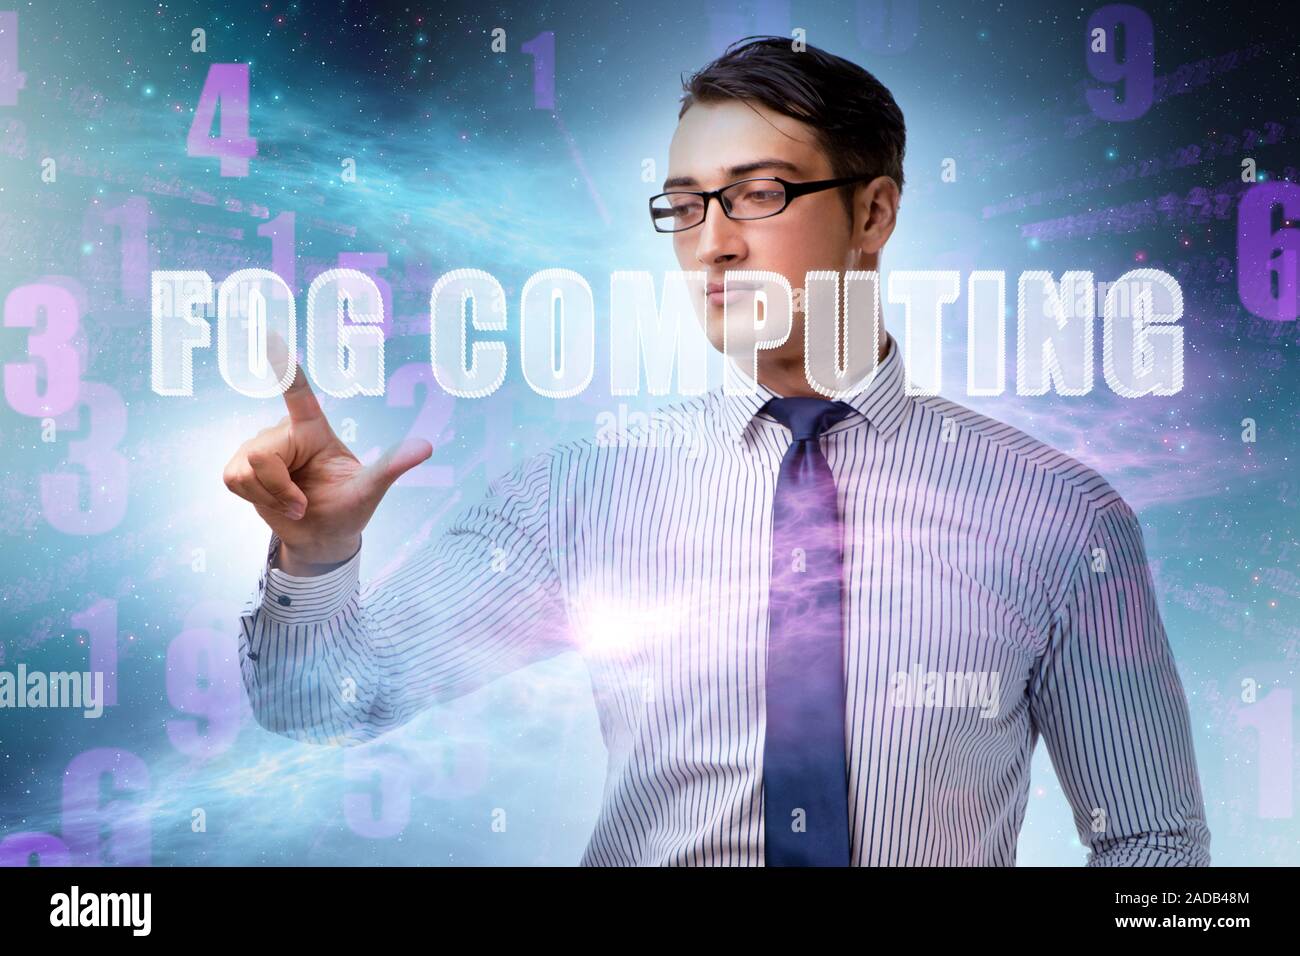 Concept of cloud edge and fog computing Stock Photo